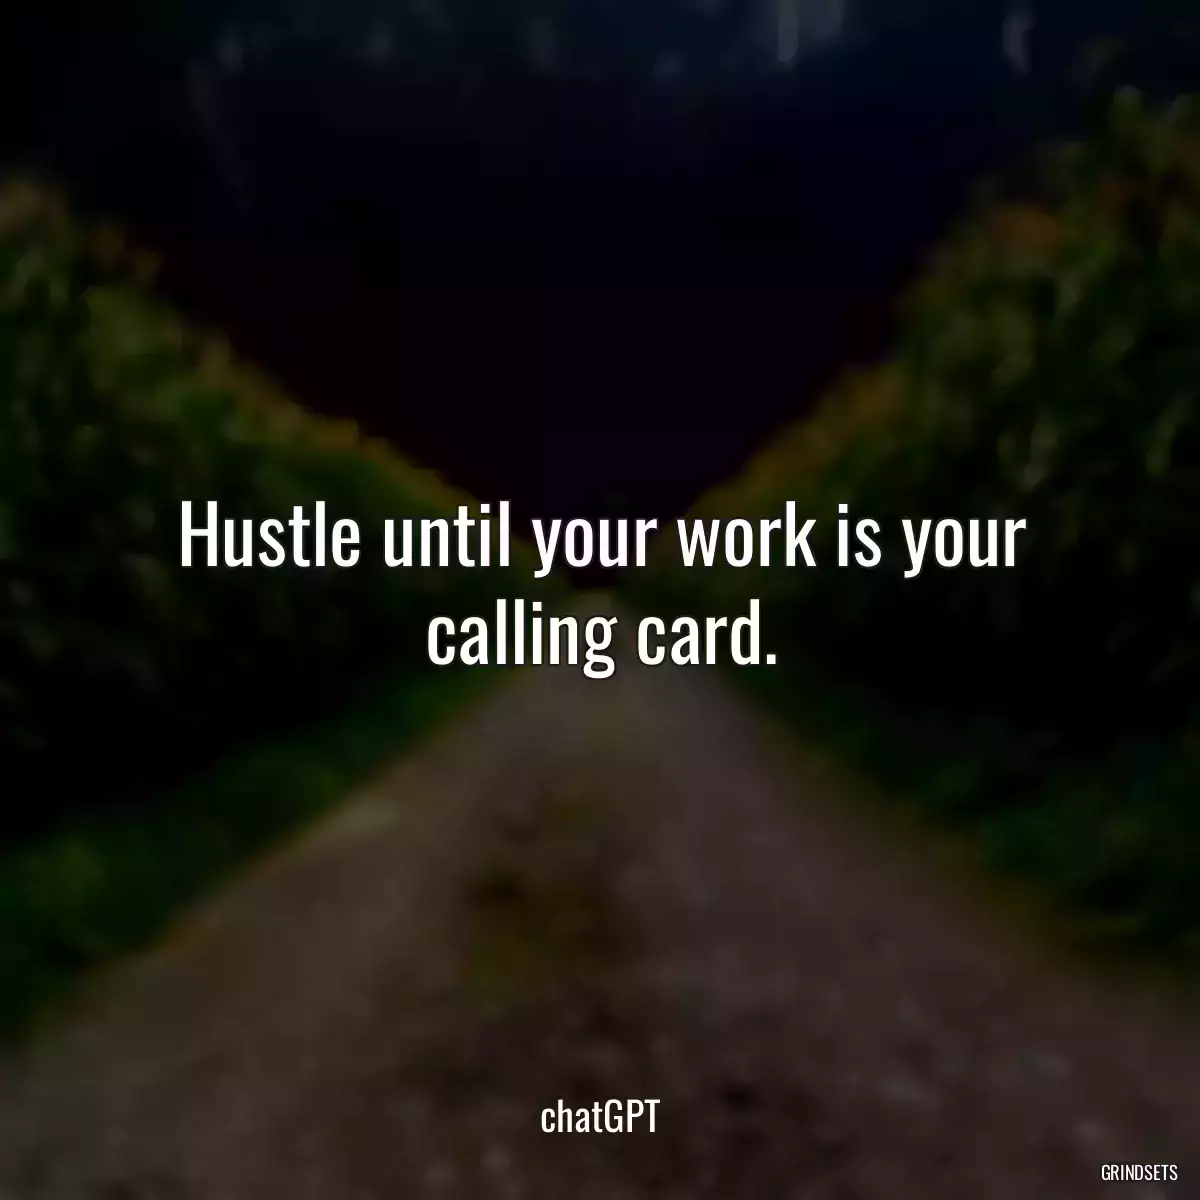 Hustle until your work is your calling card.